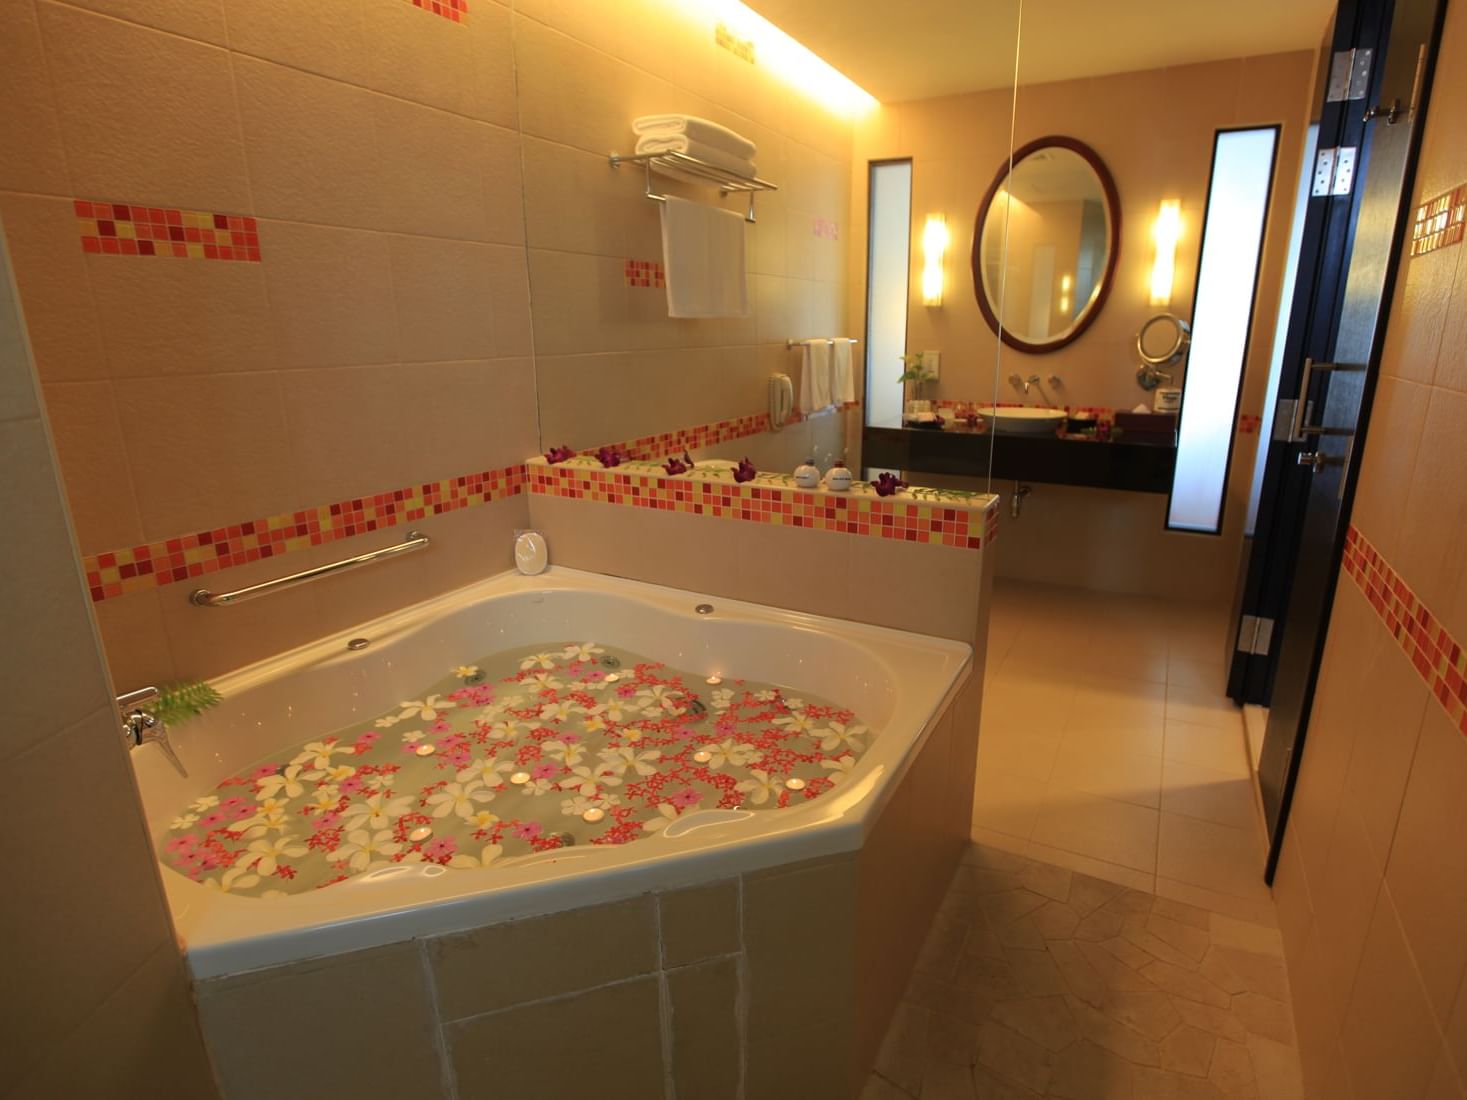 Super Deluxe Room with Jacuzzi at Hulhule Island Hotel in Malé